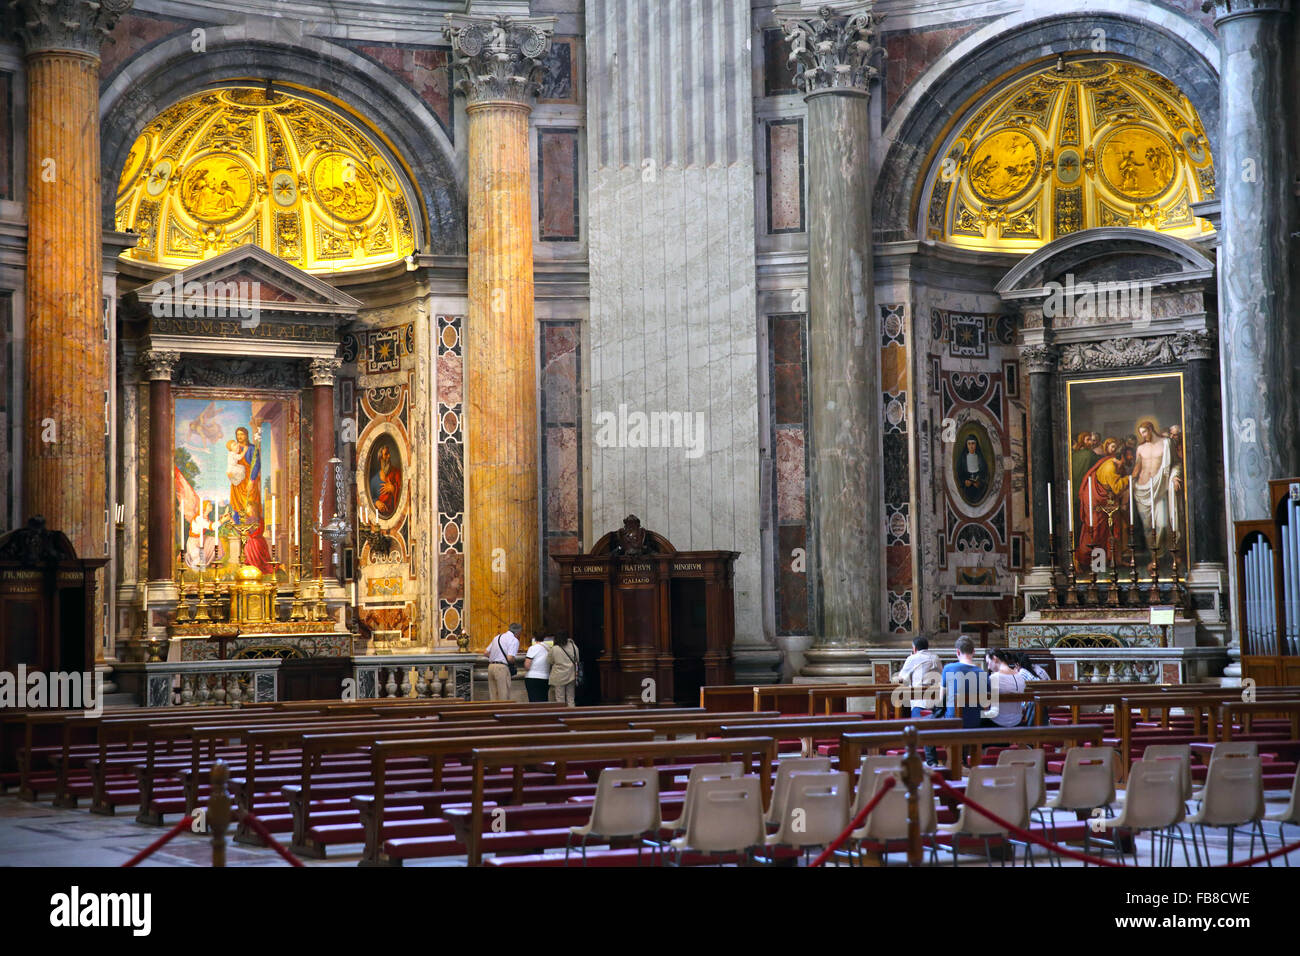 The Altar of St Joseph and Altar of St Thomas the Apostle in St Peters Basilica in the Vatican. Stock Photo